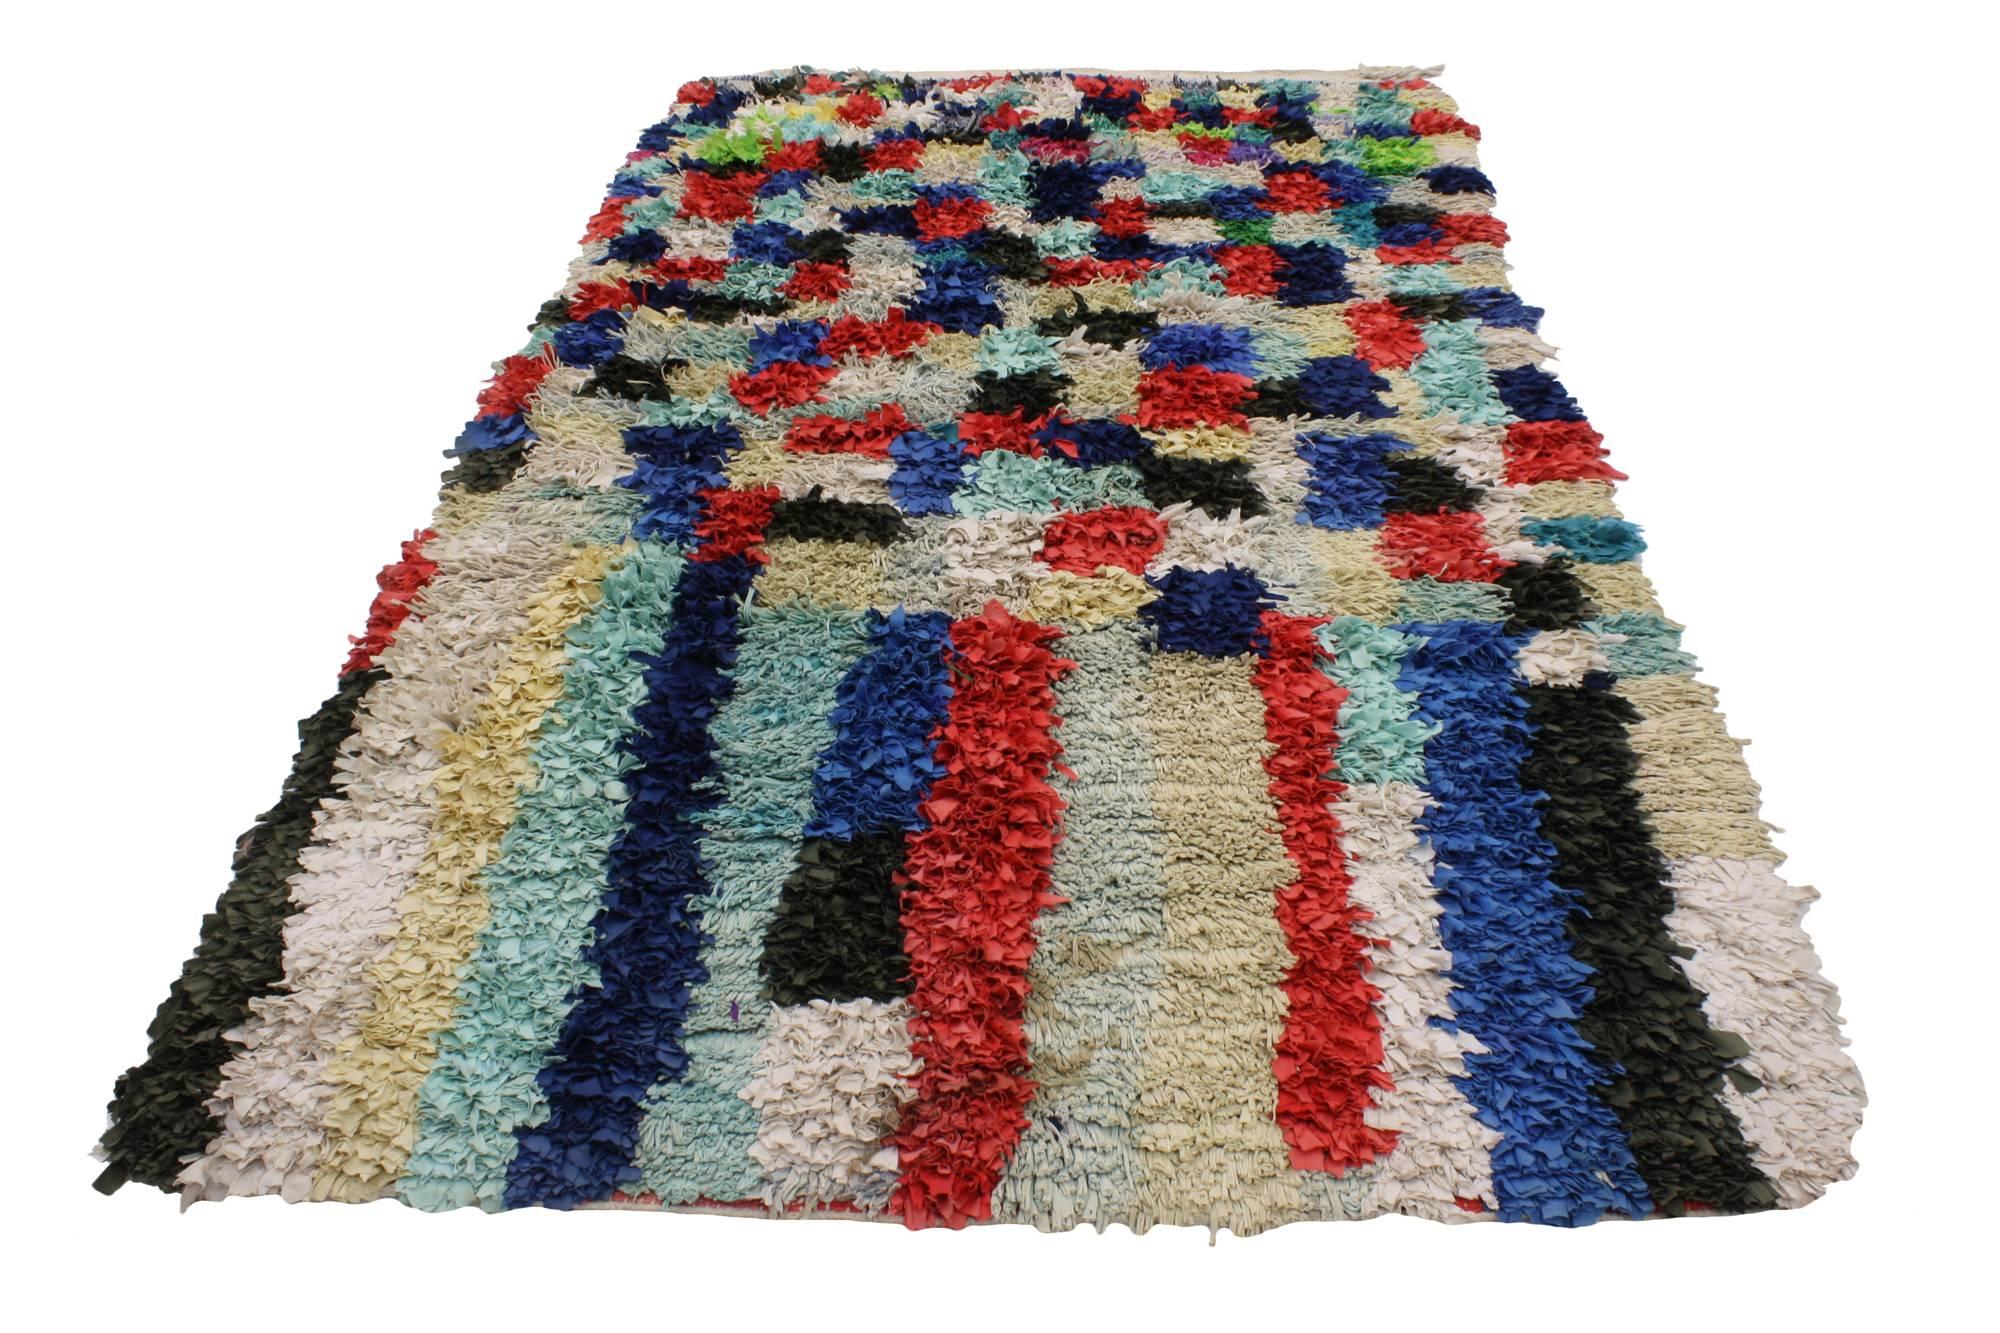 20432, Vintage Berber Moroccan Boucherouite Rug with Postmodern Bauhaus Cubism Style. This colorful vintage Berber Moroccan Boucherouite rug features a geometric pattern composed of squares and rectangles (rods). The squares and rectangular rods